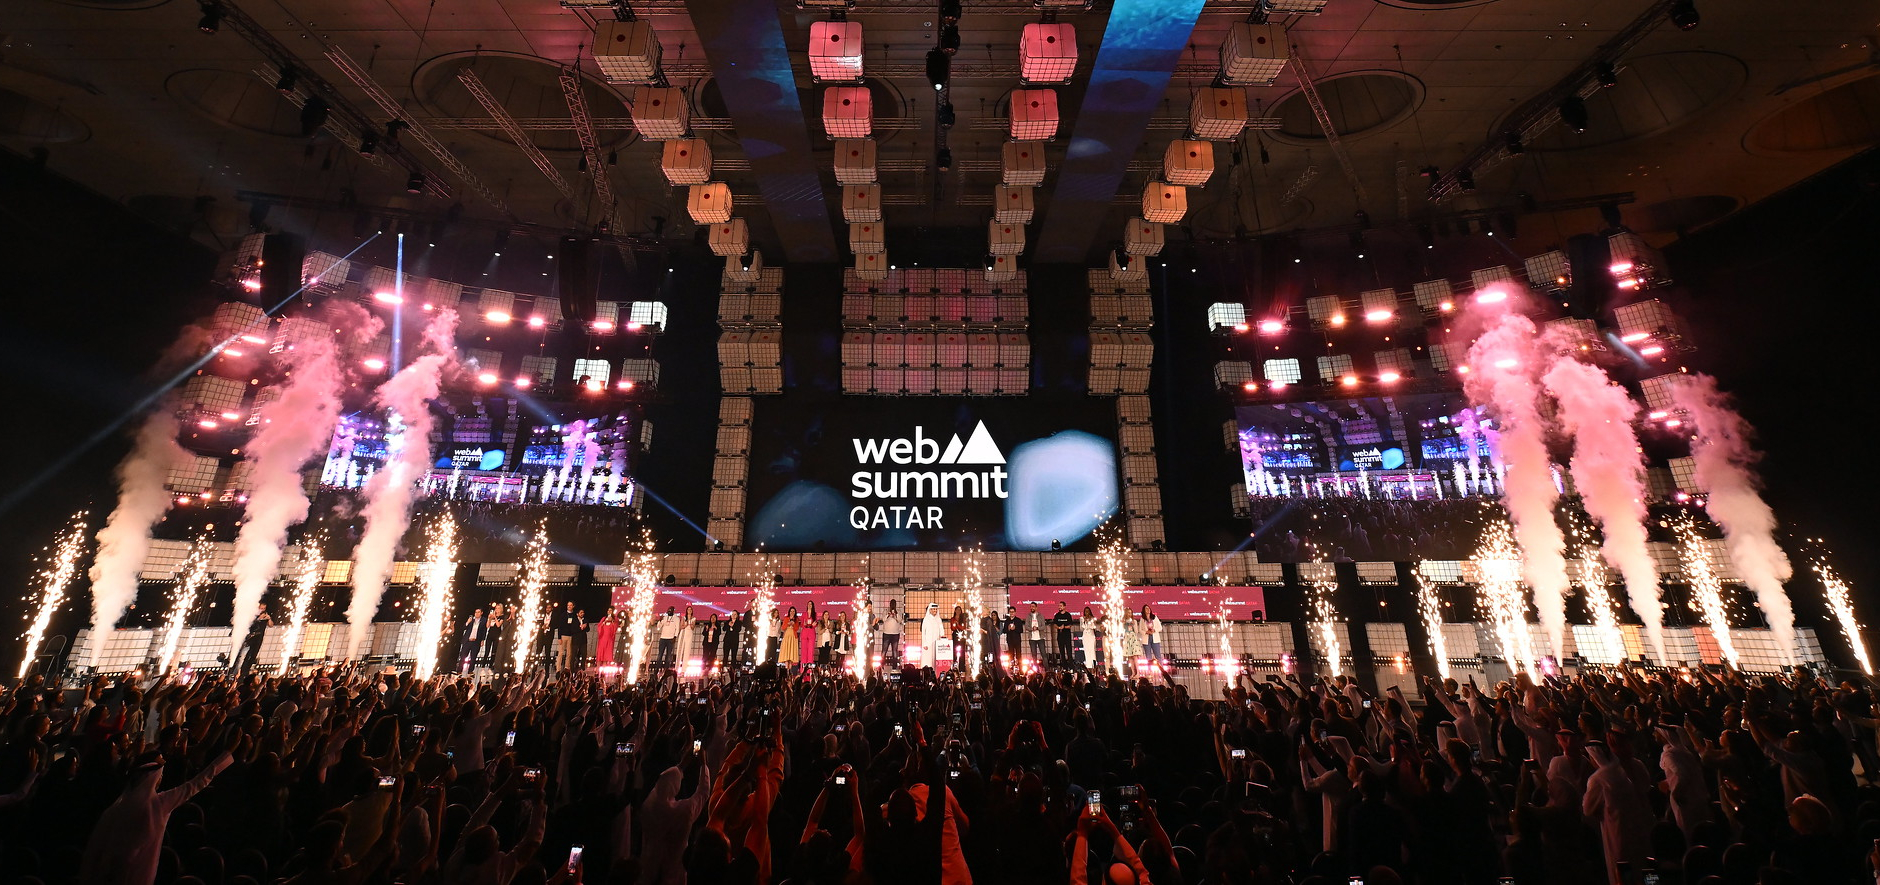 A large stage viewed over the heads of a crowded audience who are on their feet. On the stage, a long line of people face the audience. At the front of the stage, pyrotechnics go off. A large screen hanging at the back of the stage shows the Web Summit Qatar logo. This is Opening Night of Web Summit Qatar.